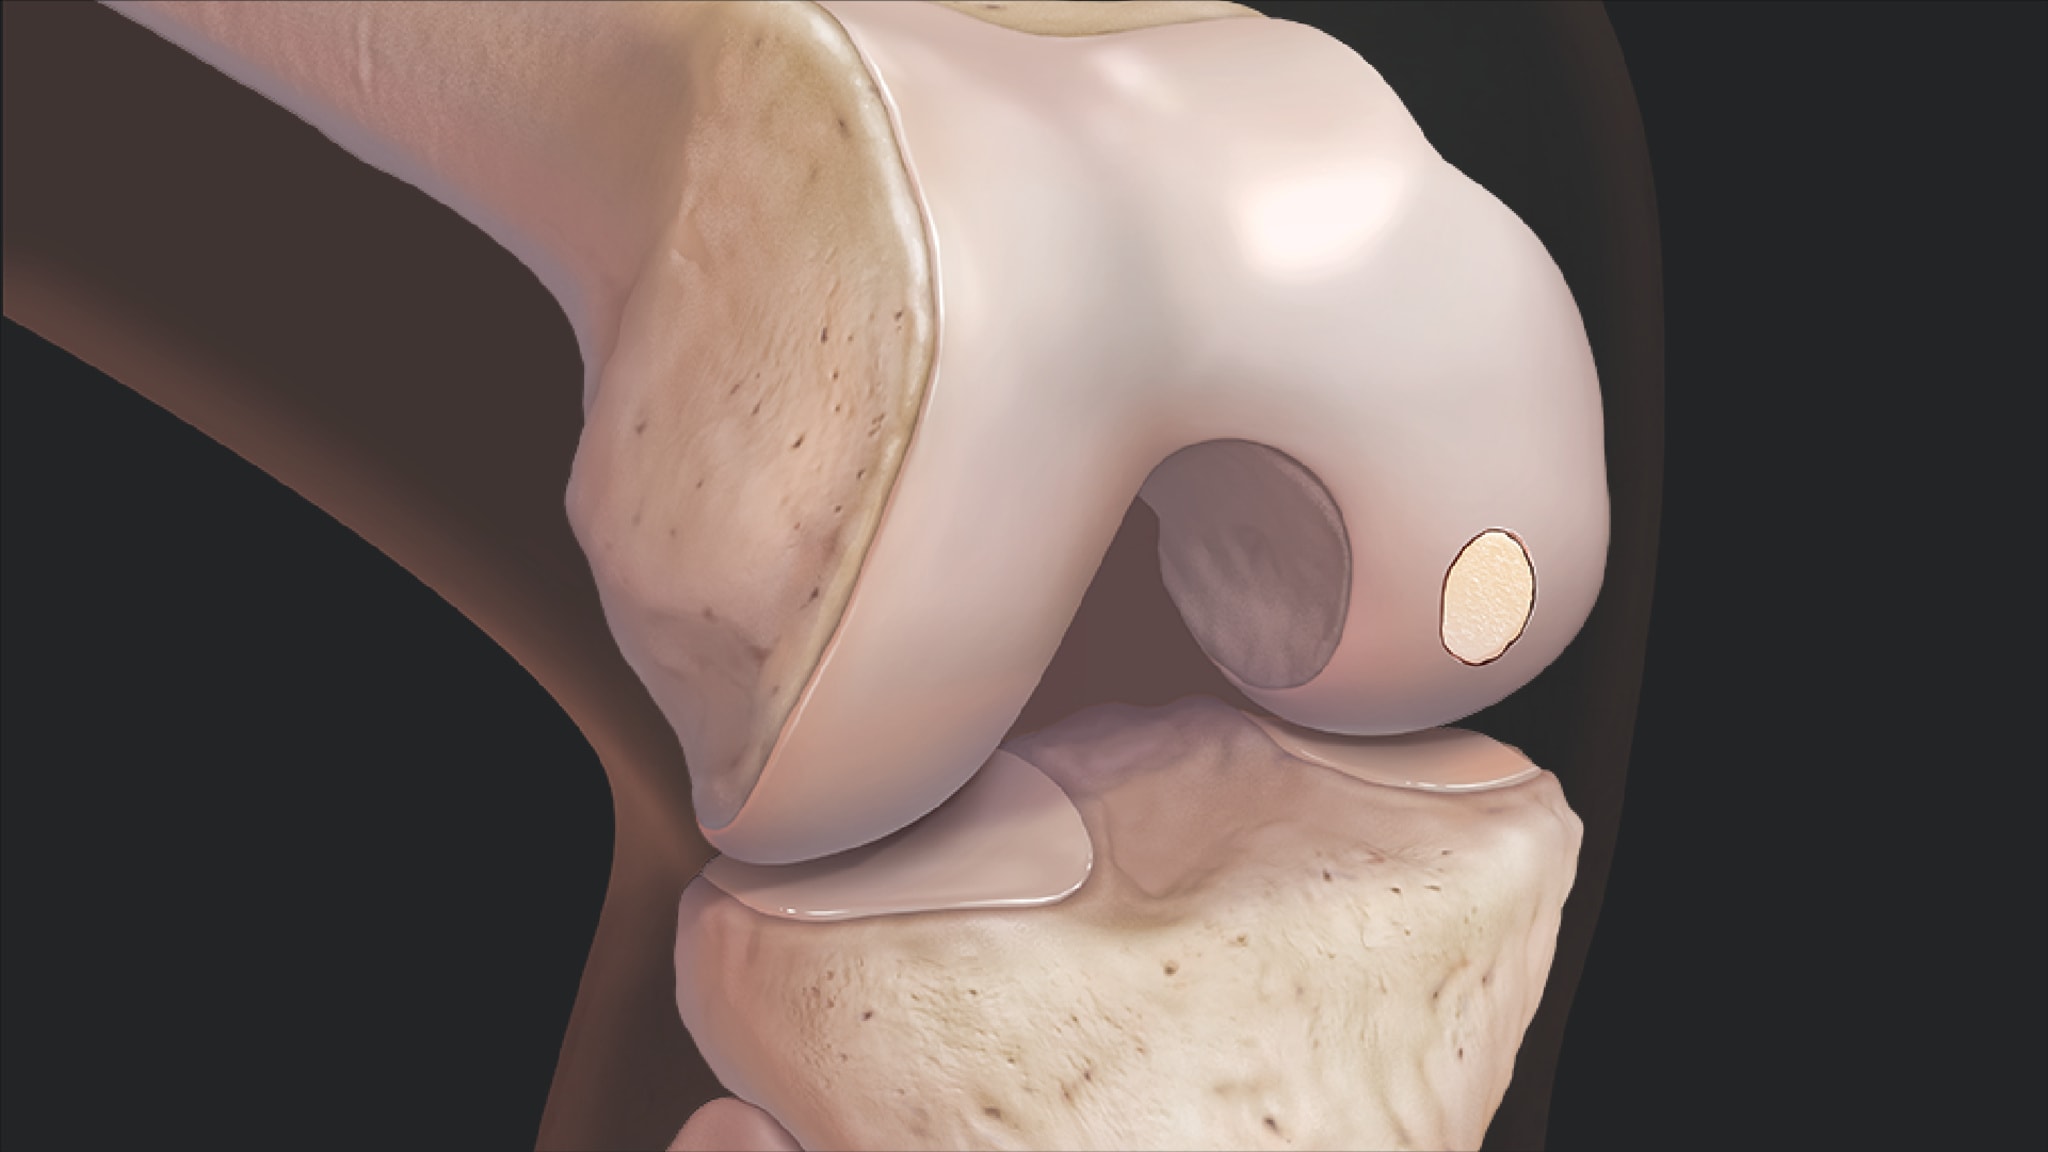 Treatment of Cartilage Defects in the Knee Using BioCartilage® Allograft